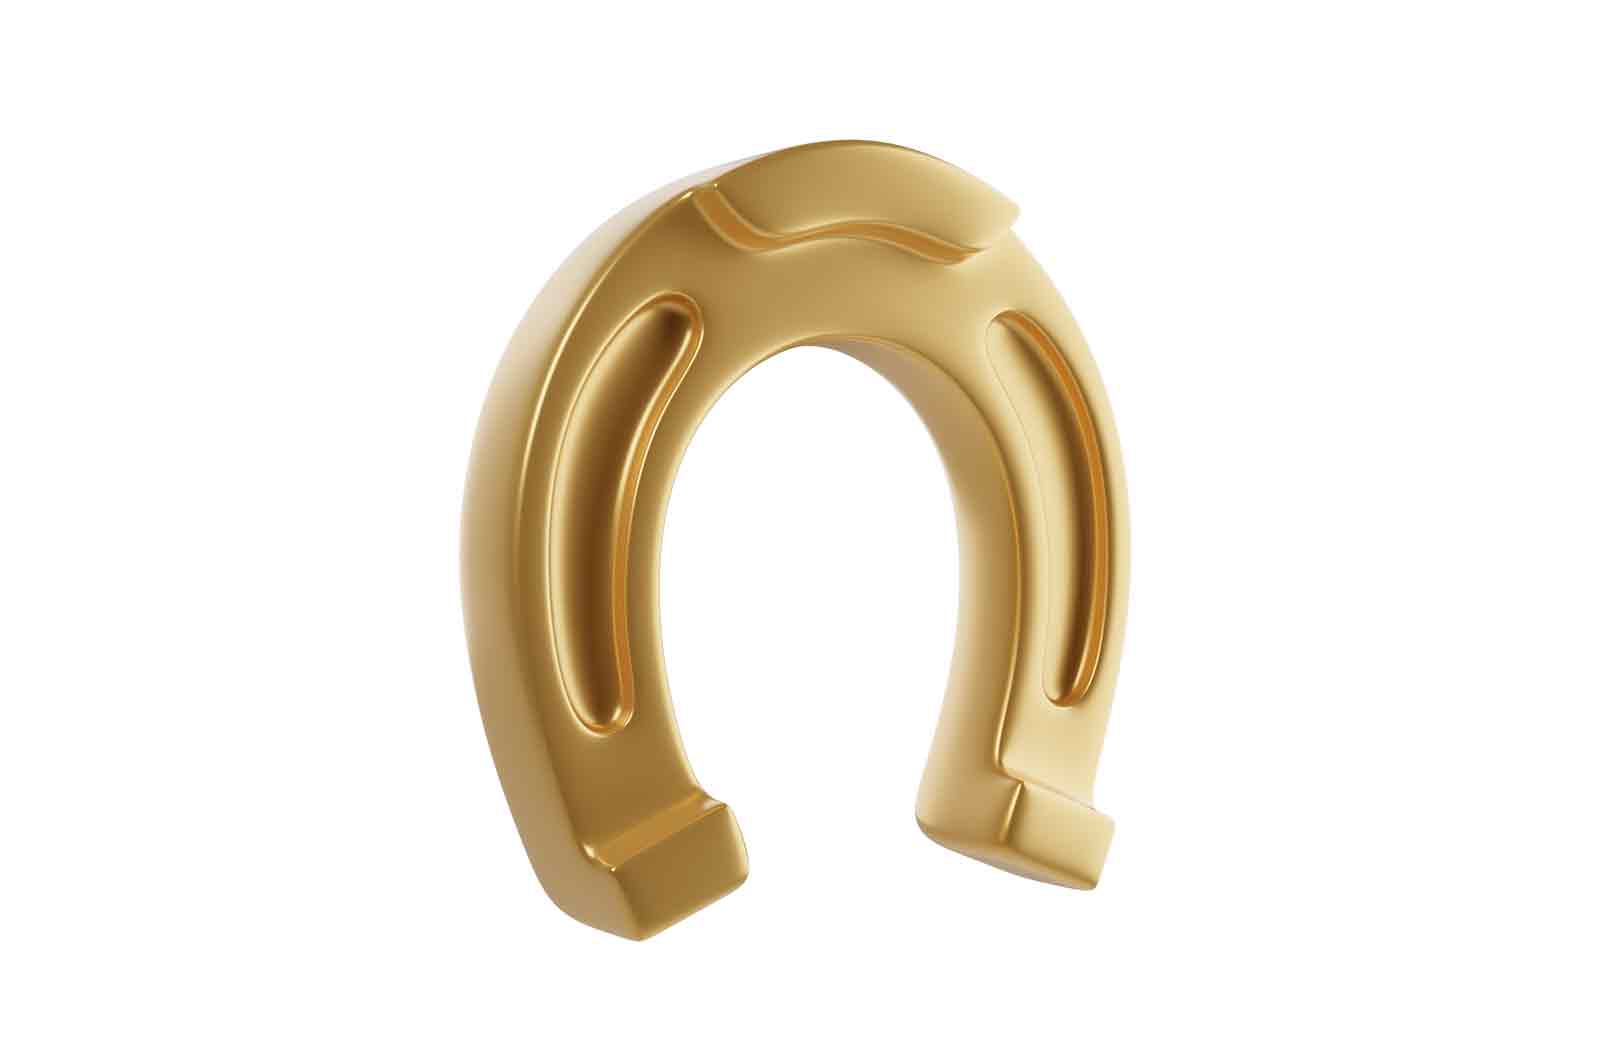 Golden Horseshoe, 3D Rendered Illustration of a shiny and smooth horseshoe facing upwards in a 3D perspective. The image symbolizes luck, fortune, and prosperity.